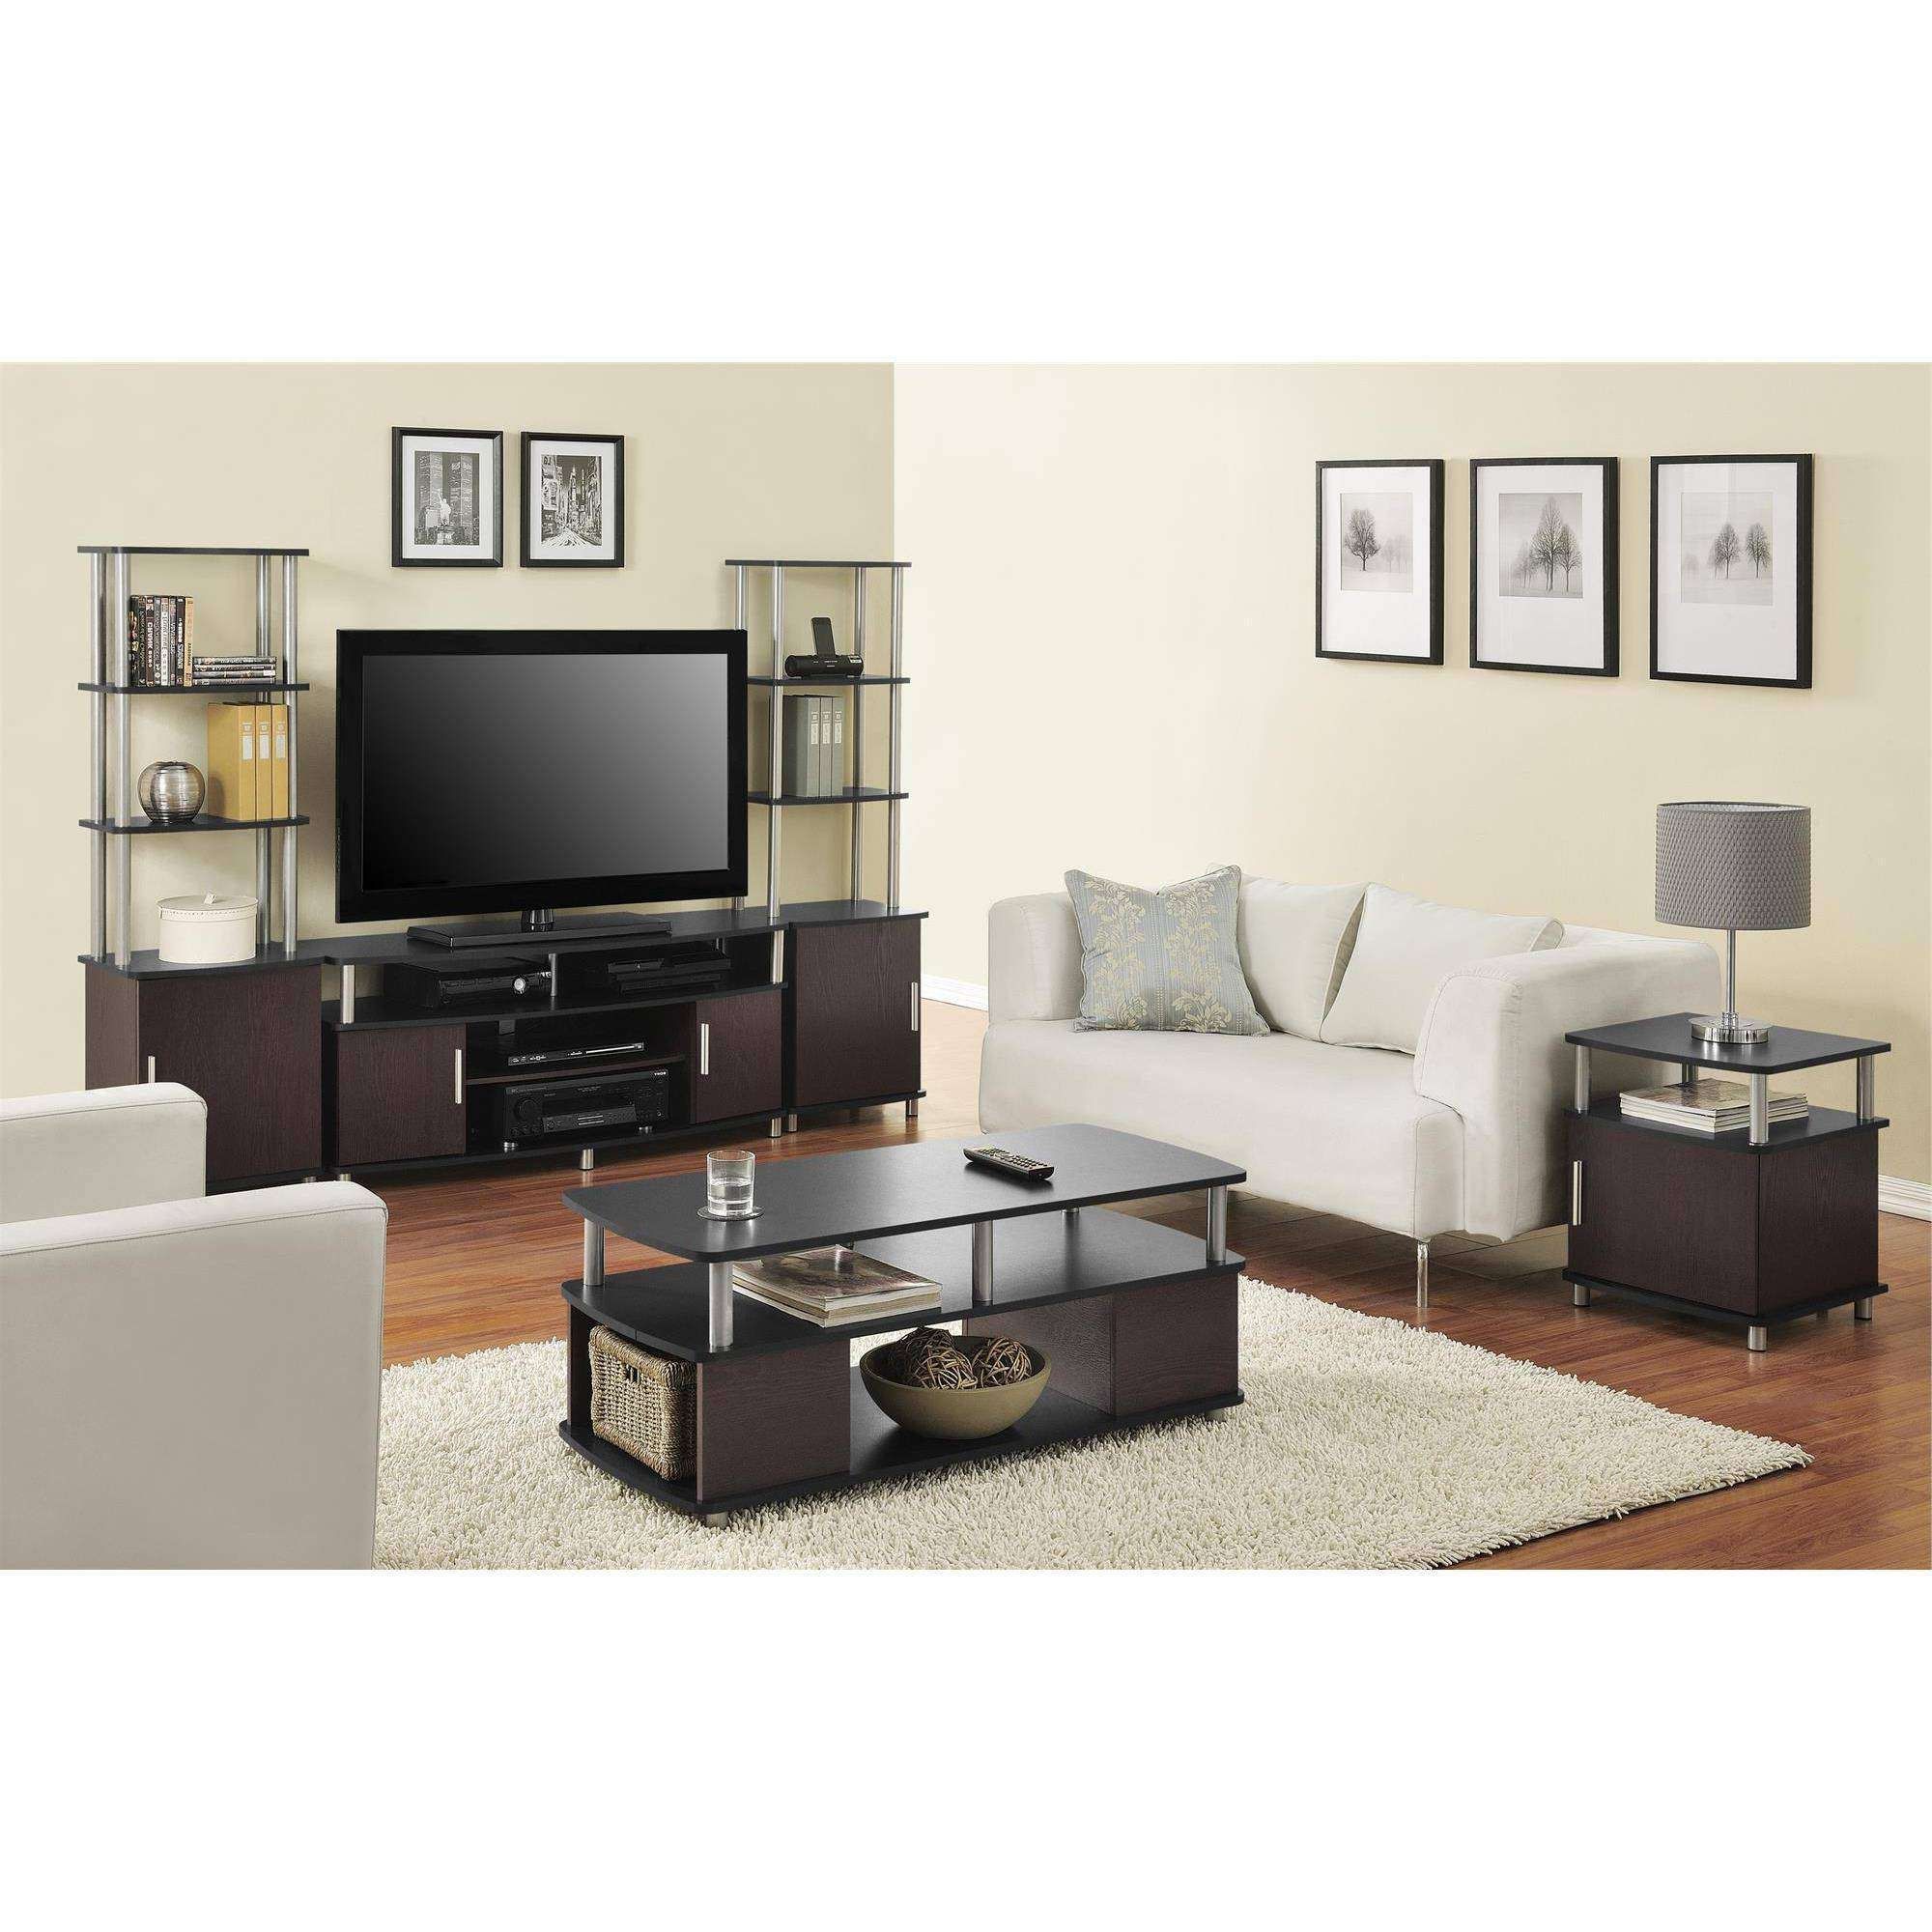 Table : Modern Coffee Table Stunning Tv Cabinets And Coffee Table Within Tv Cabinets And Coffee Table Sets (View 6 of 20)